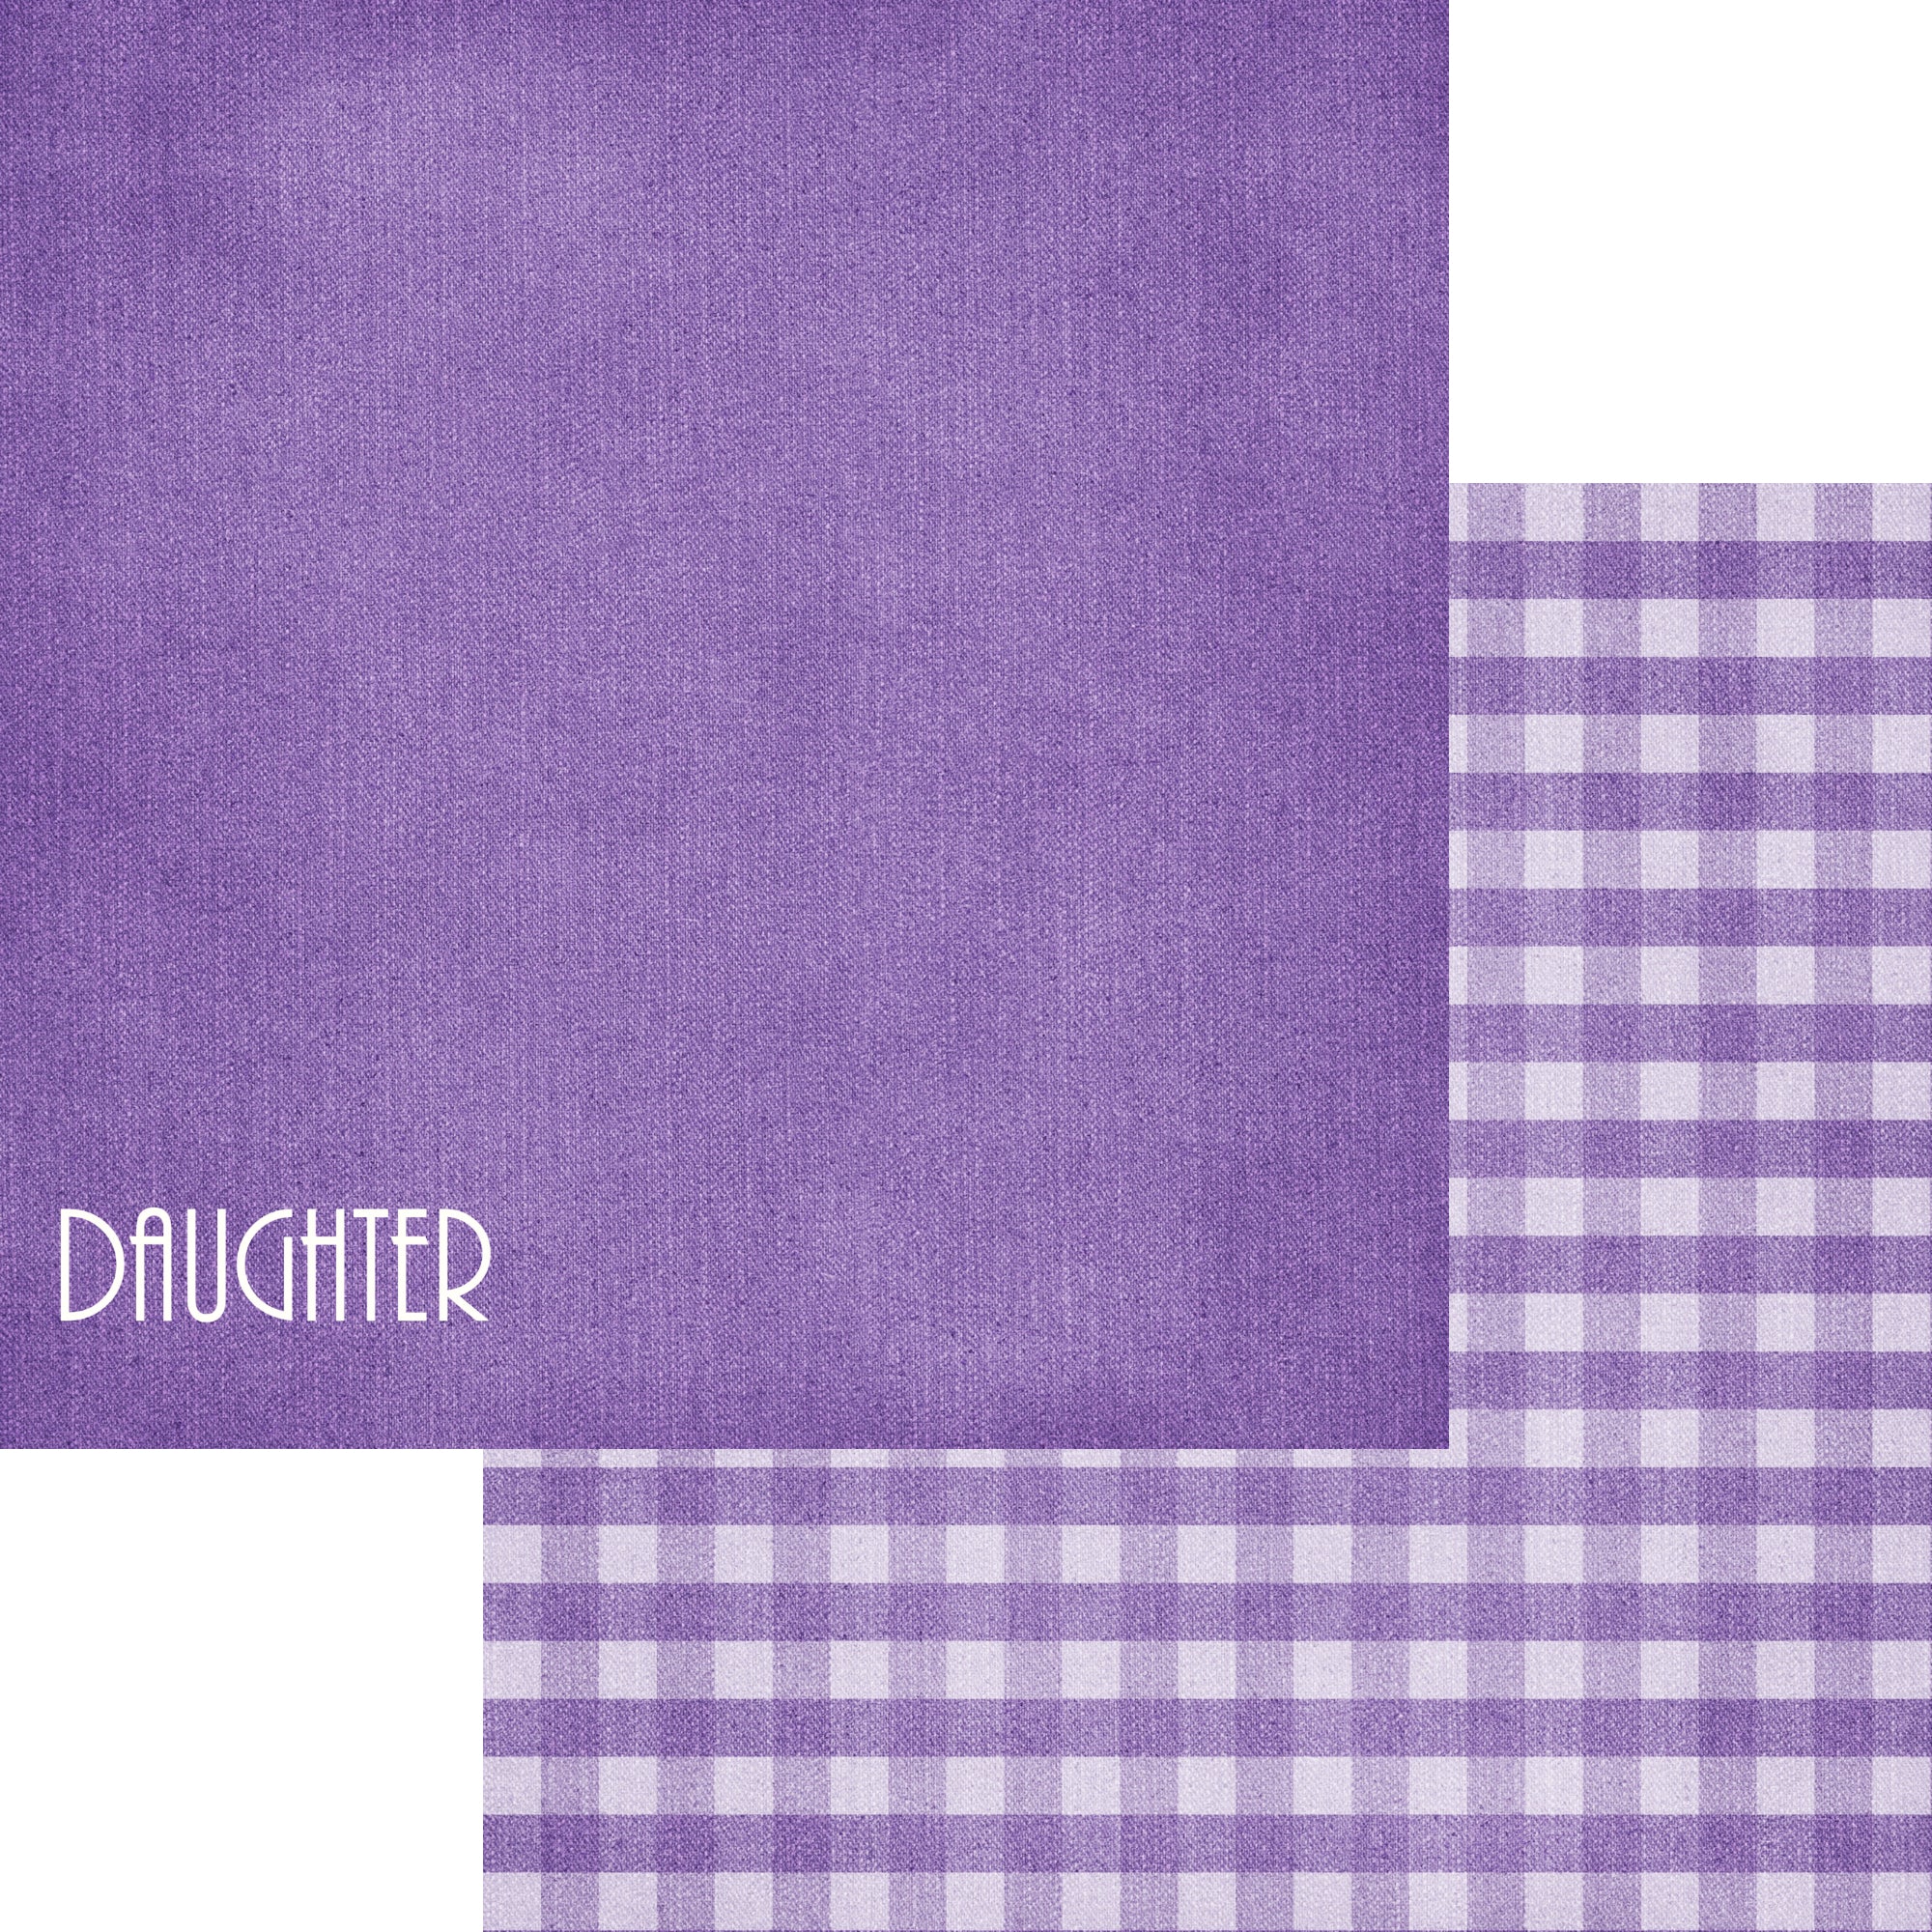 Family Collection Daughter 12 x 12 Double-Sided Scrapbook Paper by SSC Designs